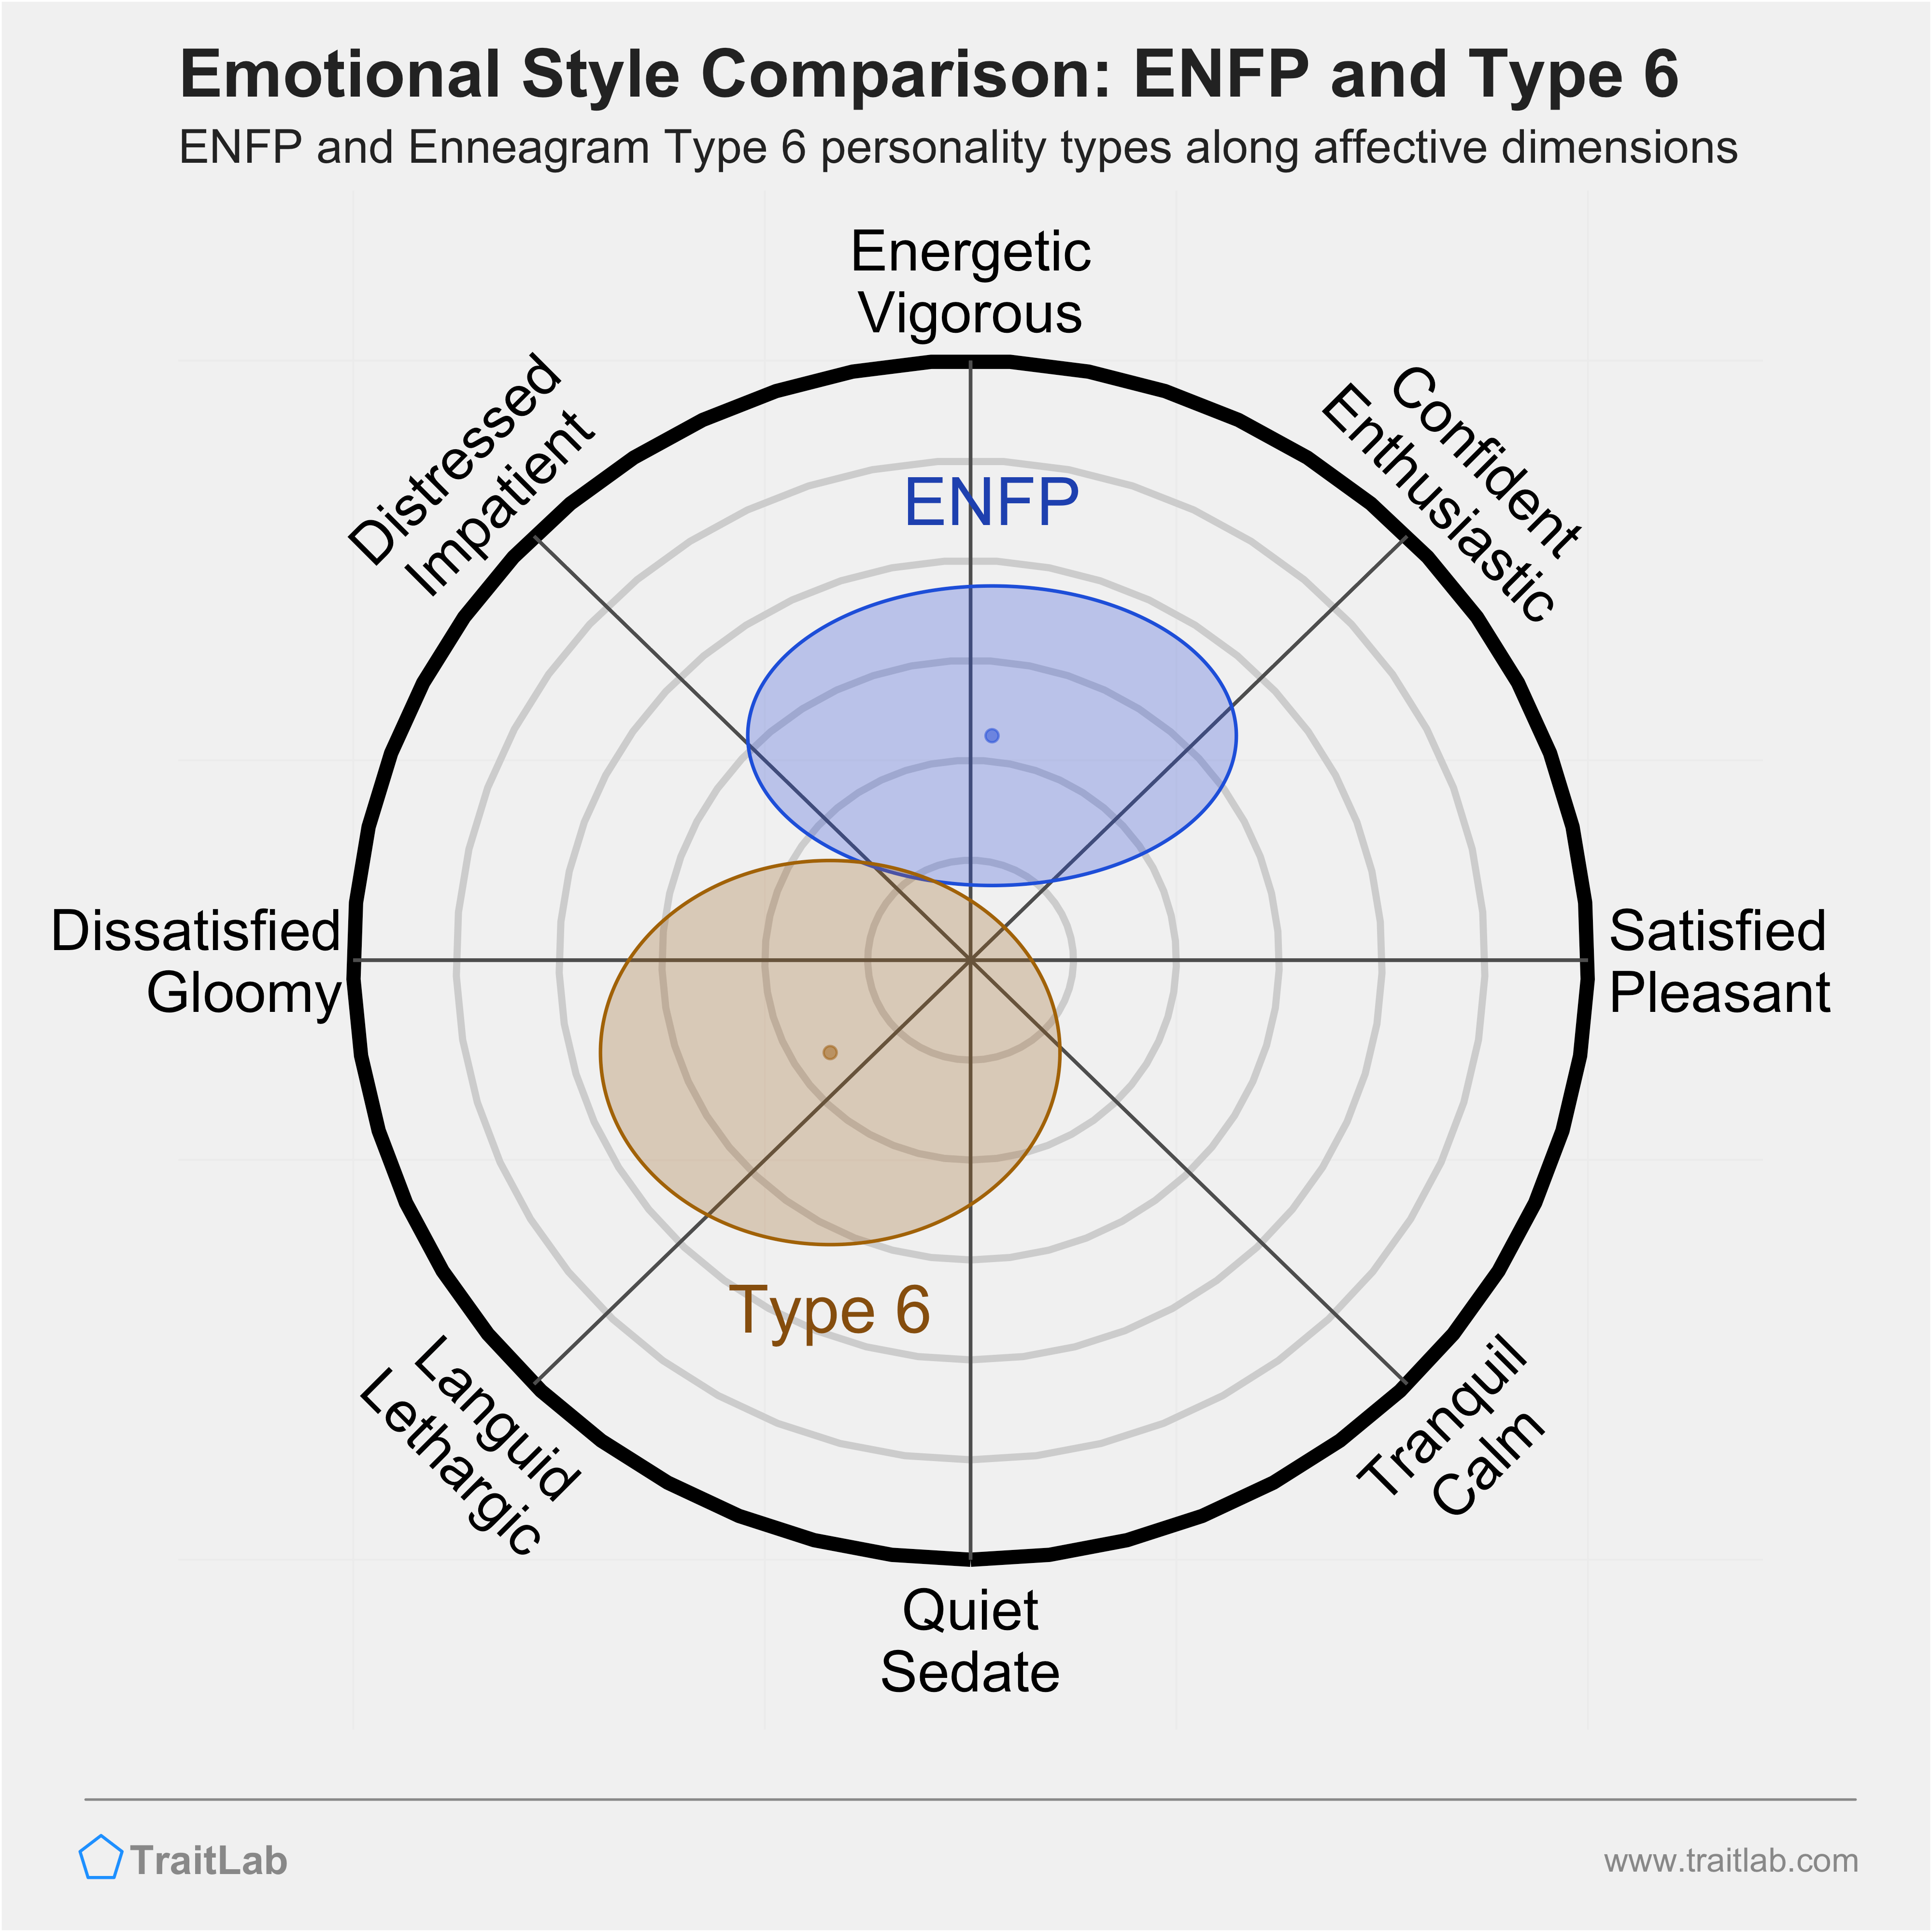 ENFP and Type 6 comparison across emotional (affective) dimensions